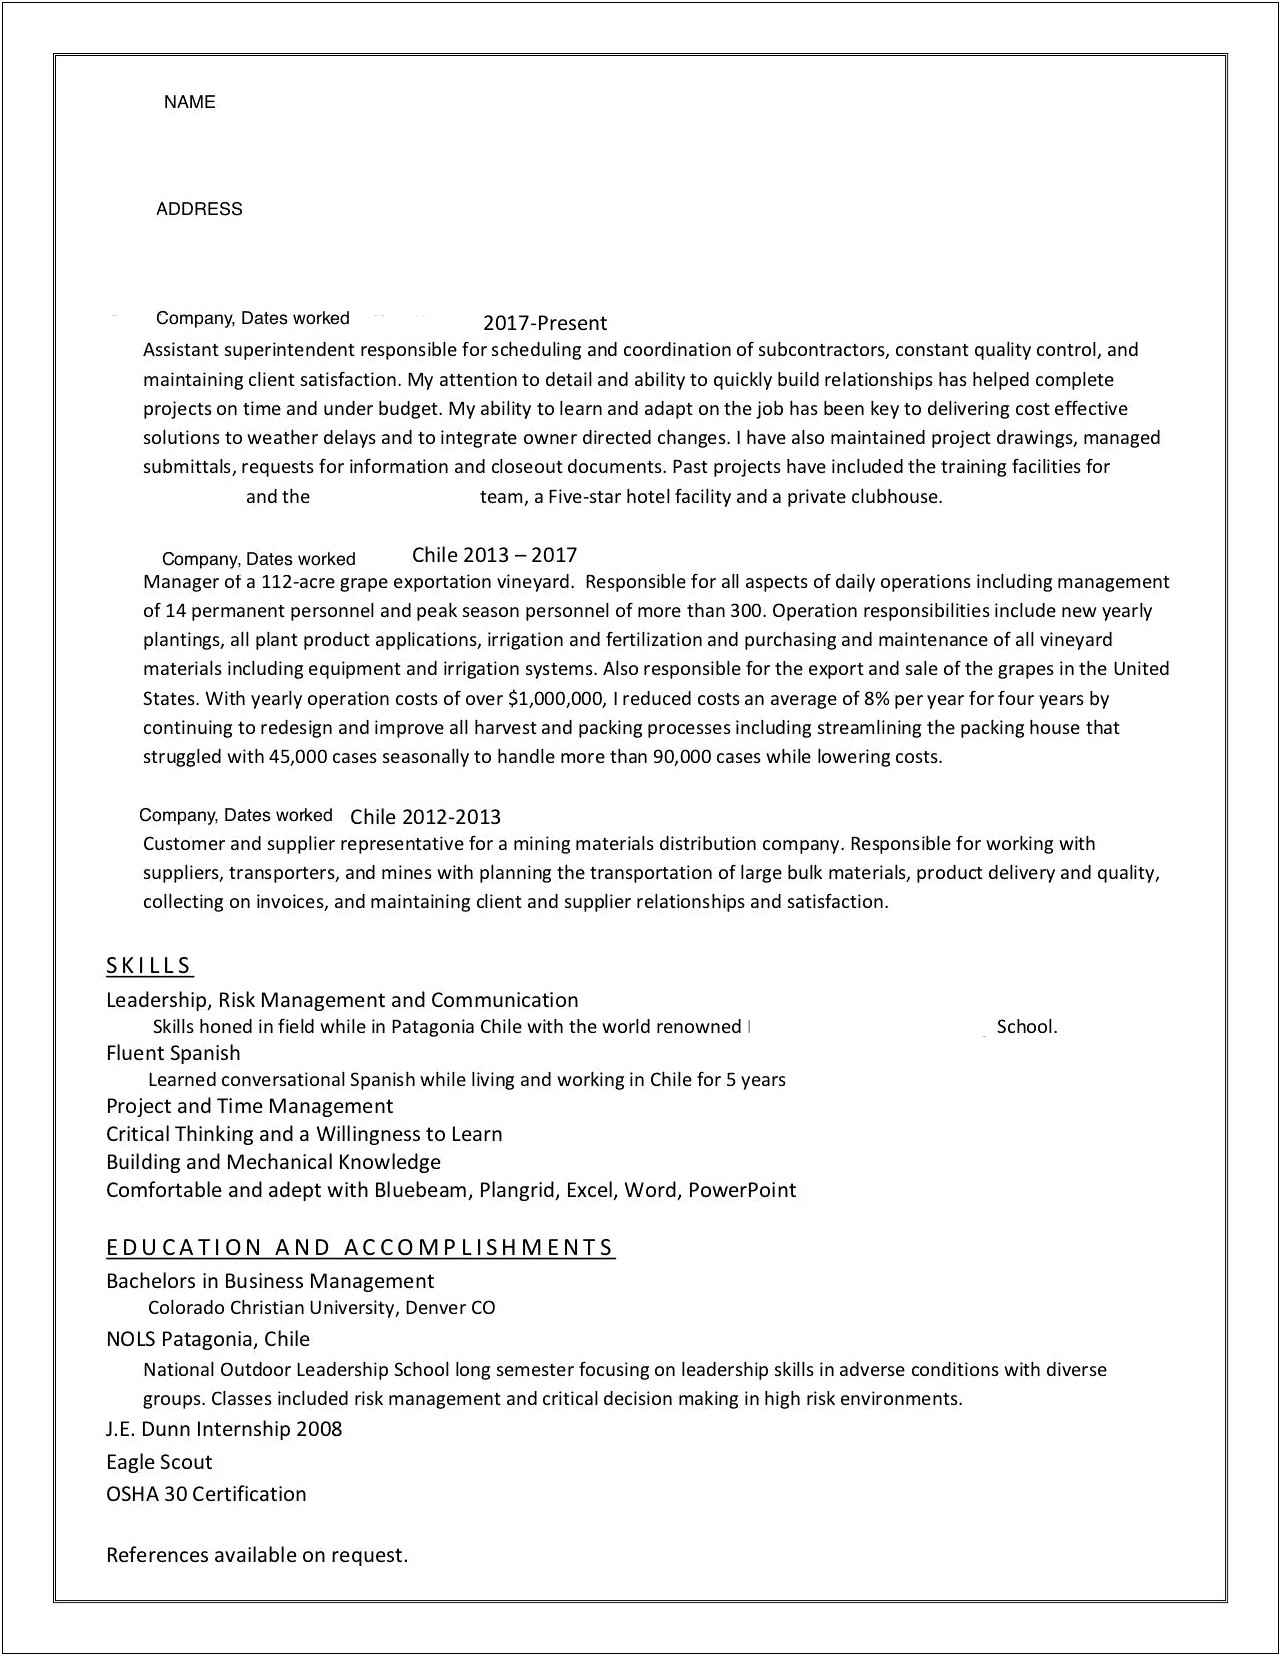 Resume For Construction Site Manager